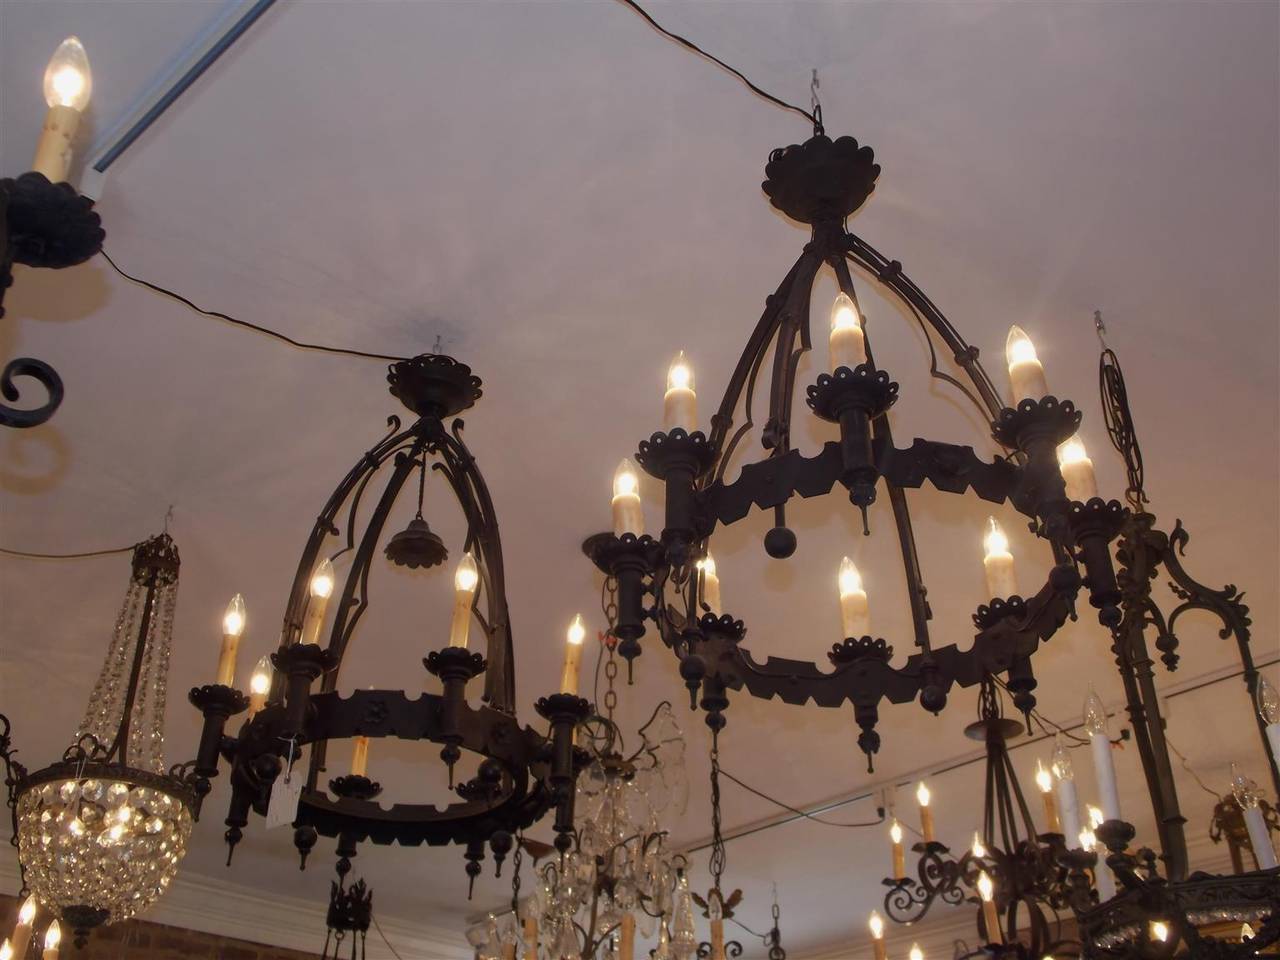 Pair of American wrought iron eight-light circular chandeliers with decorative cut work, pierced bobeches, floral medallions, ball finials, and original canopies. Originally gas powered and have been electrified, Mid-19th century.